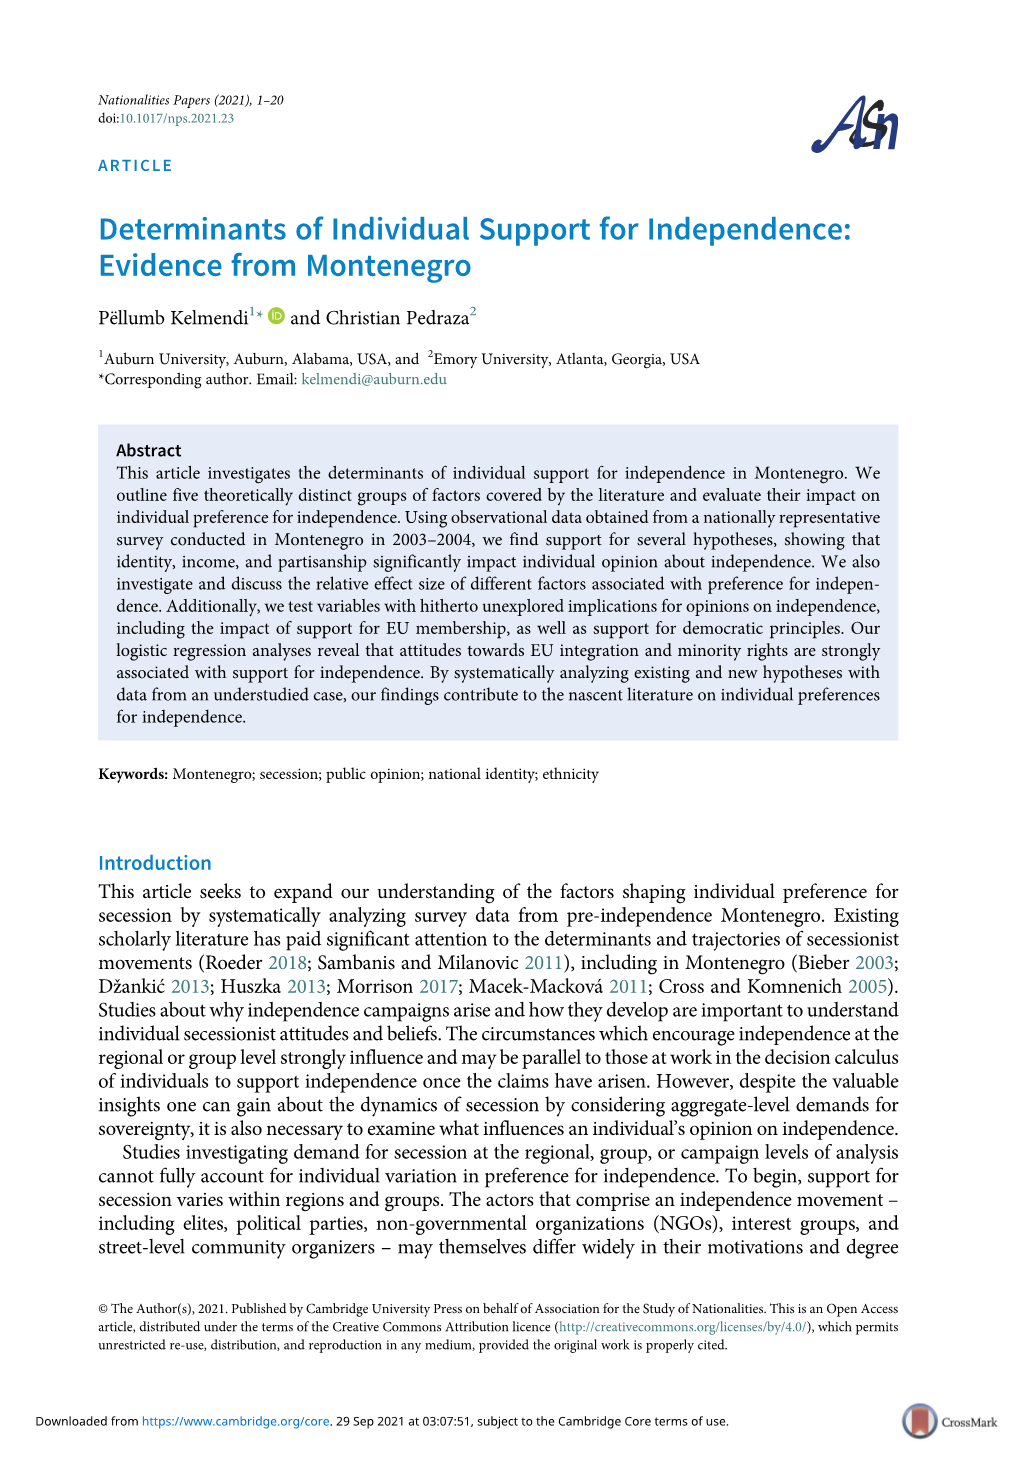 Determinants of Individual Support for Independence: Evidence from Montenegro